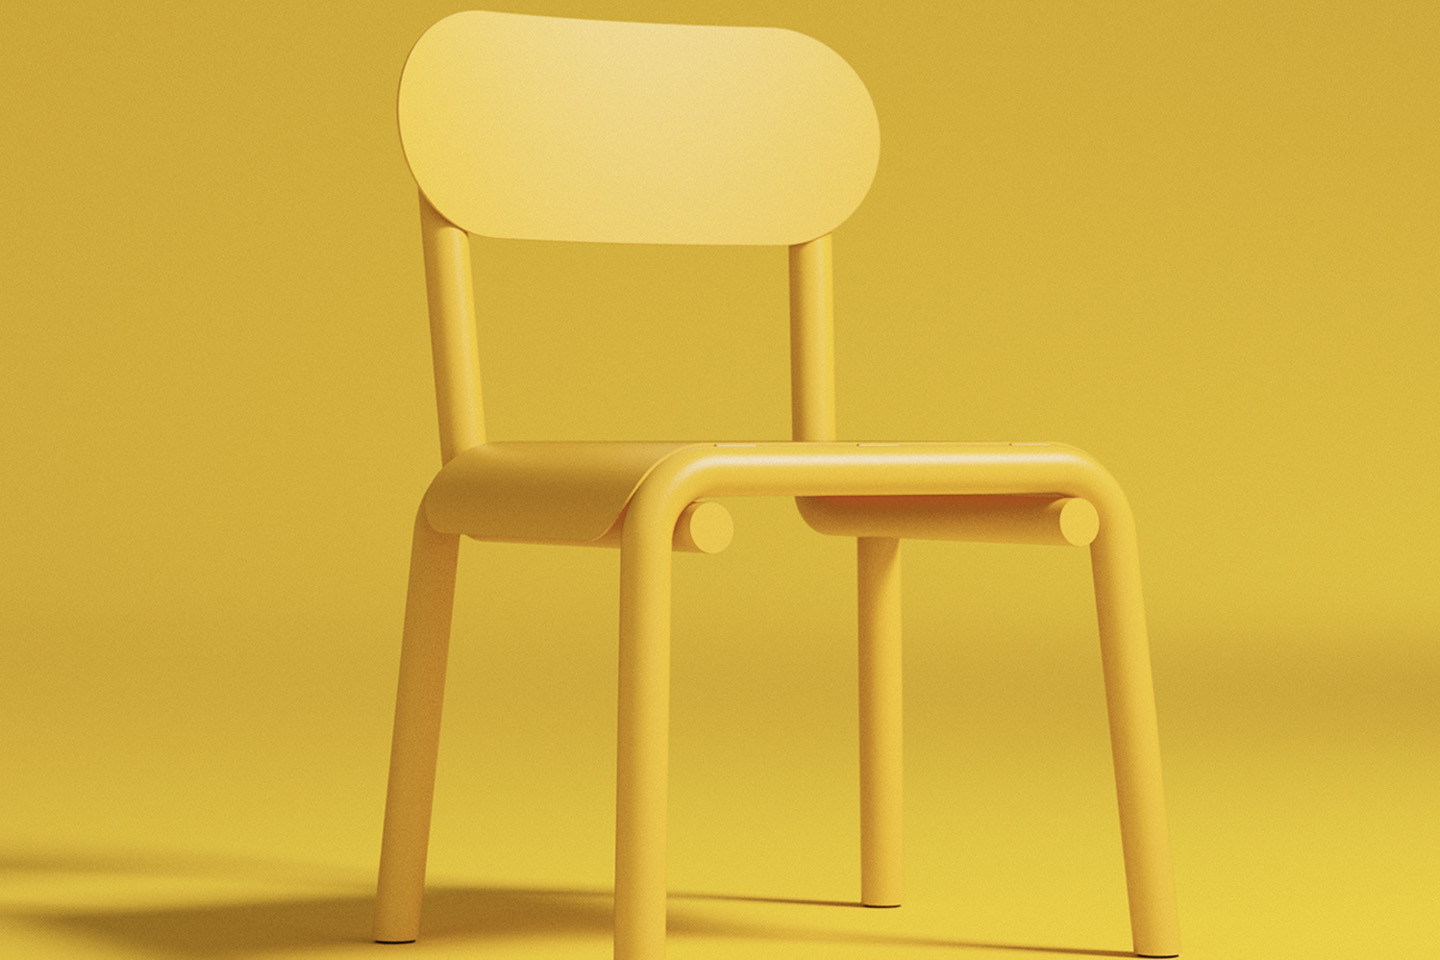 #Minimalistic yellow chair is a simple experiment in the bending and twisting of metallic tubes